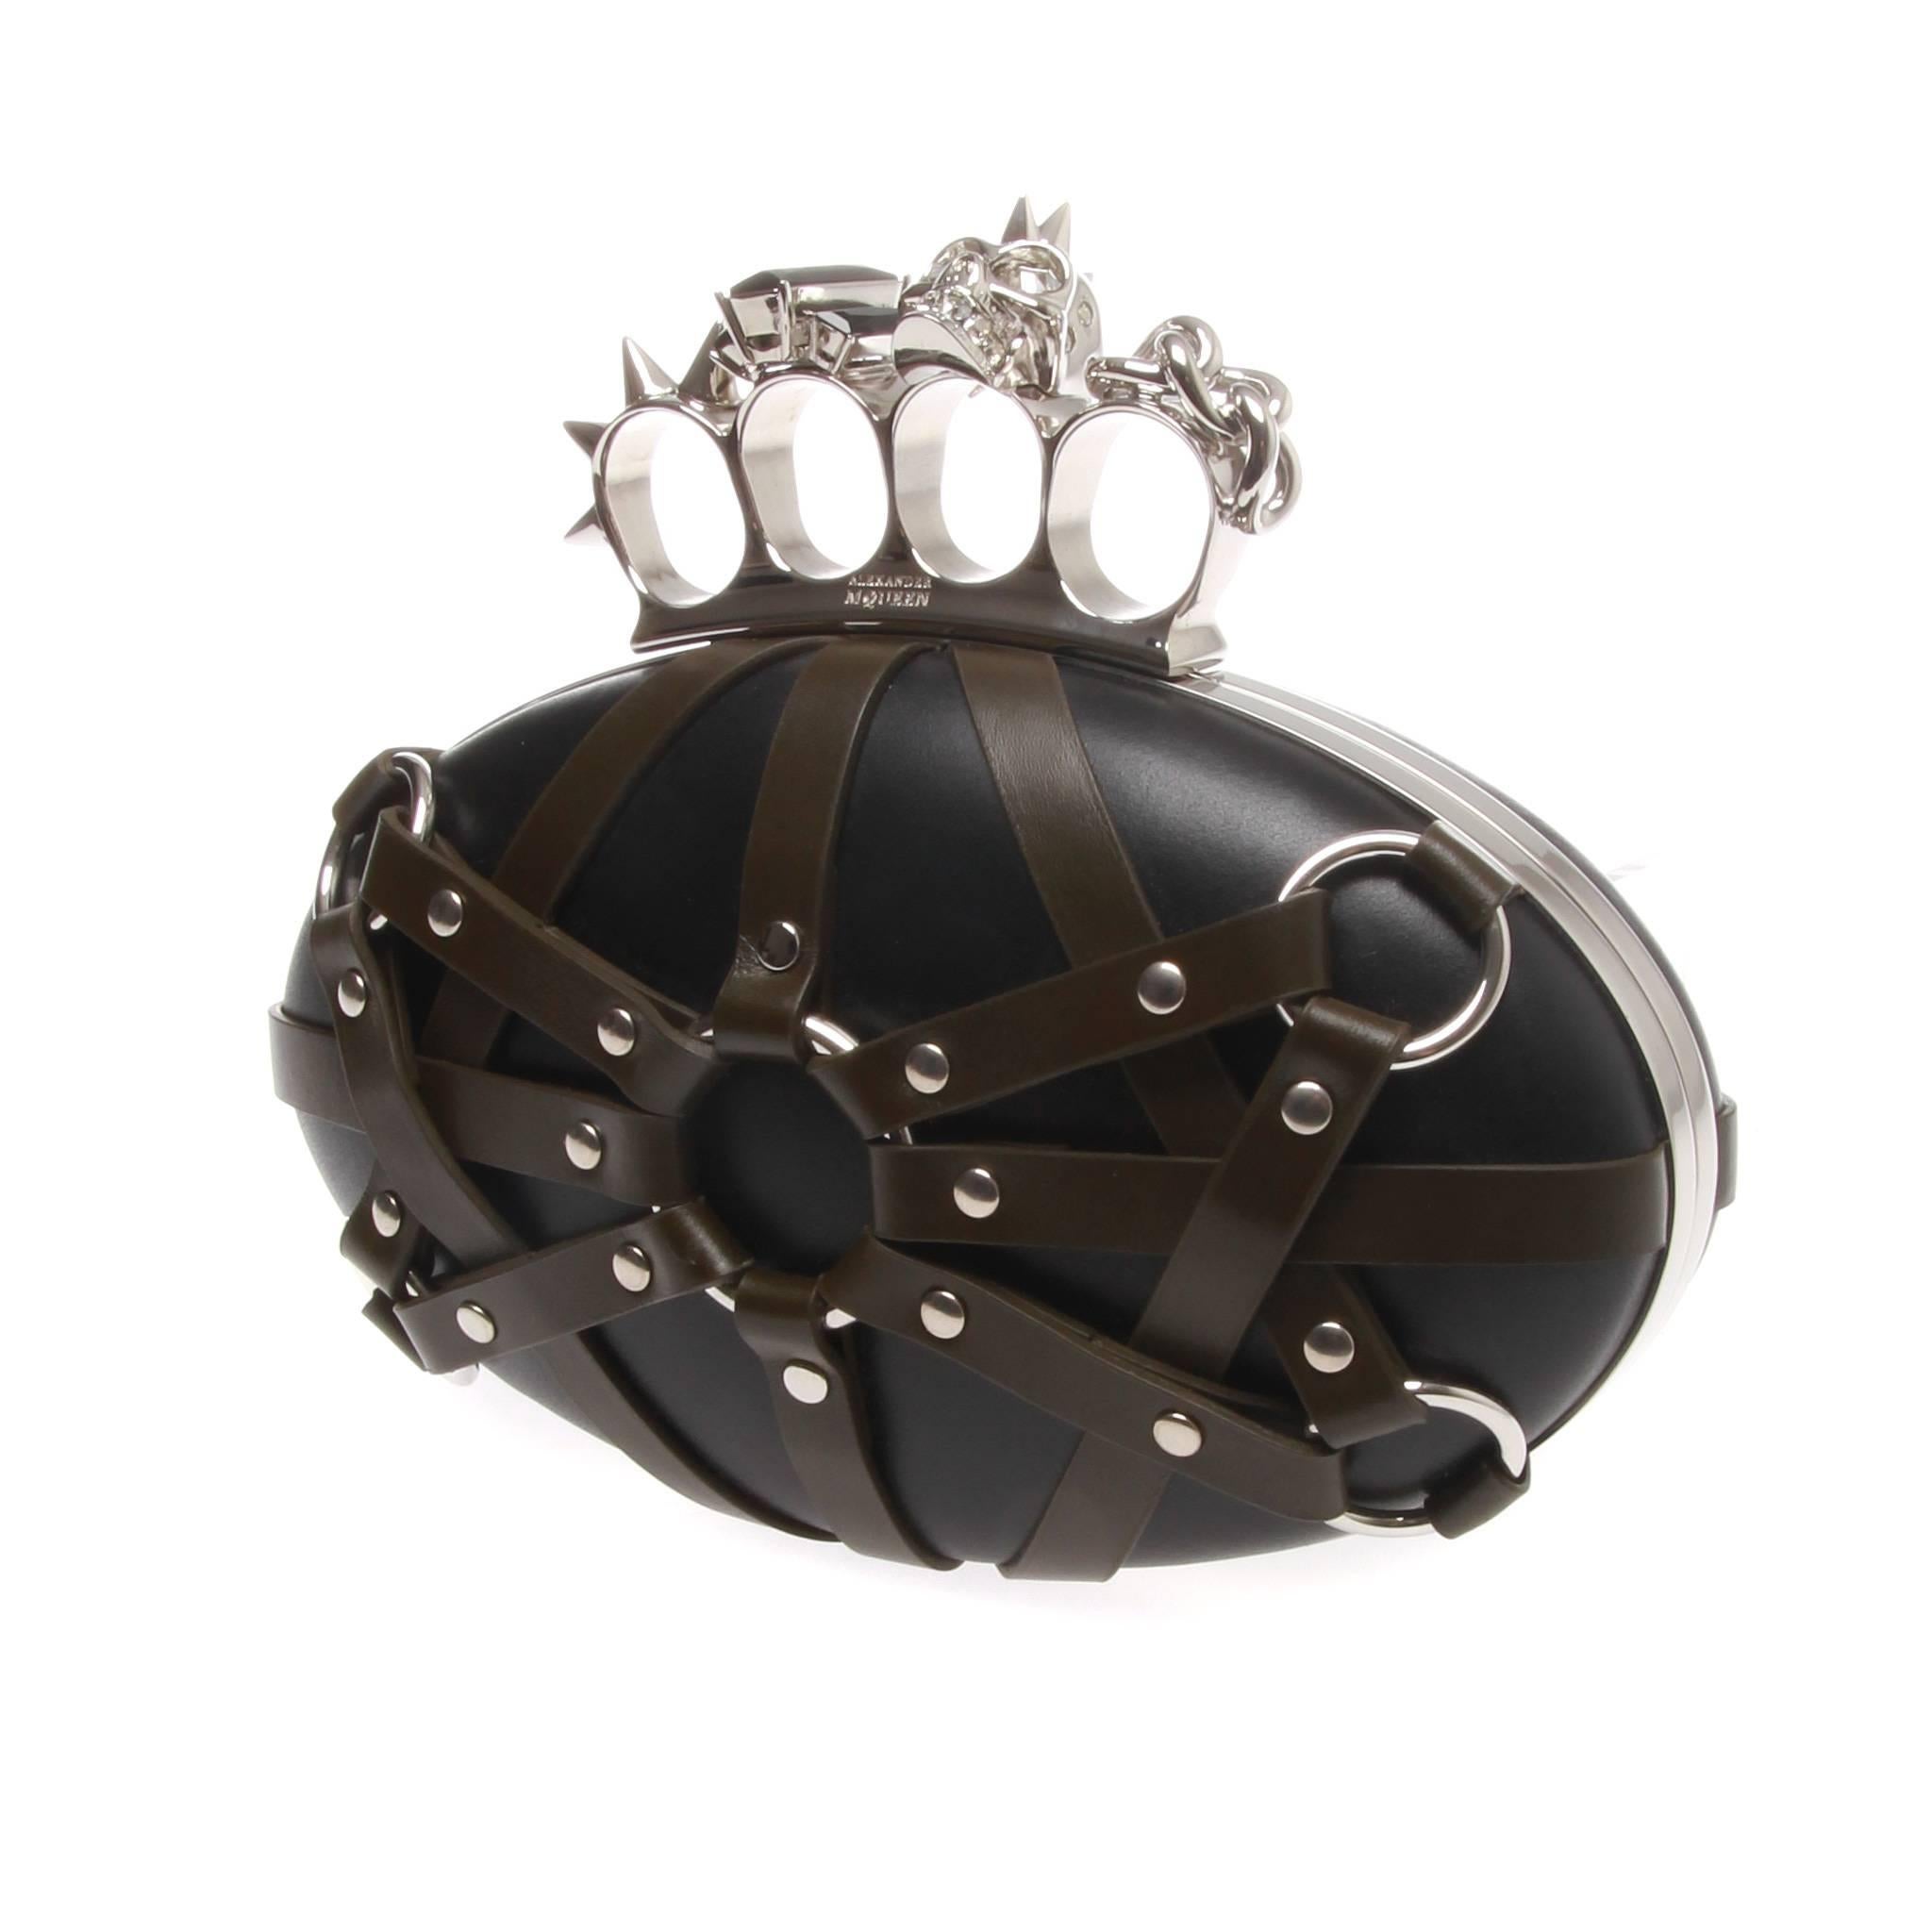 Alexander McQueen Harnessed Leather Skull Box Clutch

Punk, Rock, Funky!

A Fabulous-Funky Harnessed Leather Skull Box Clutch by ALEXANDER MCQUEEN.
It features a sultry bondage effect in sleek leather, defines this polished-punk evening clutch, and